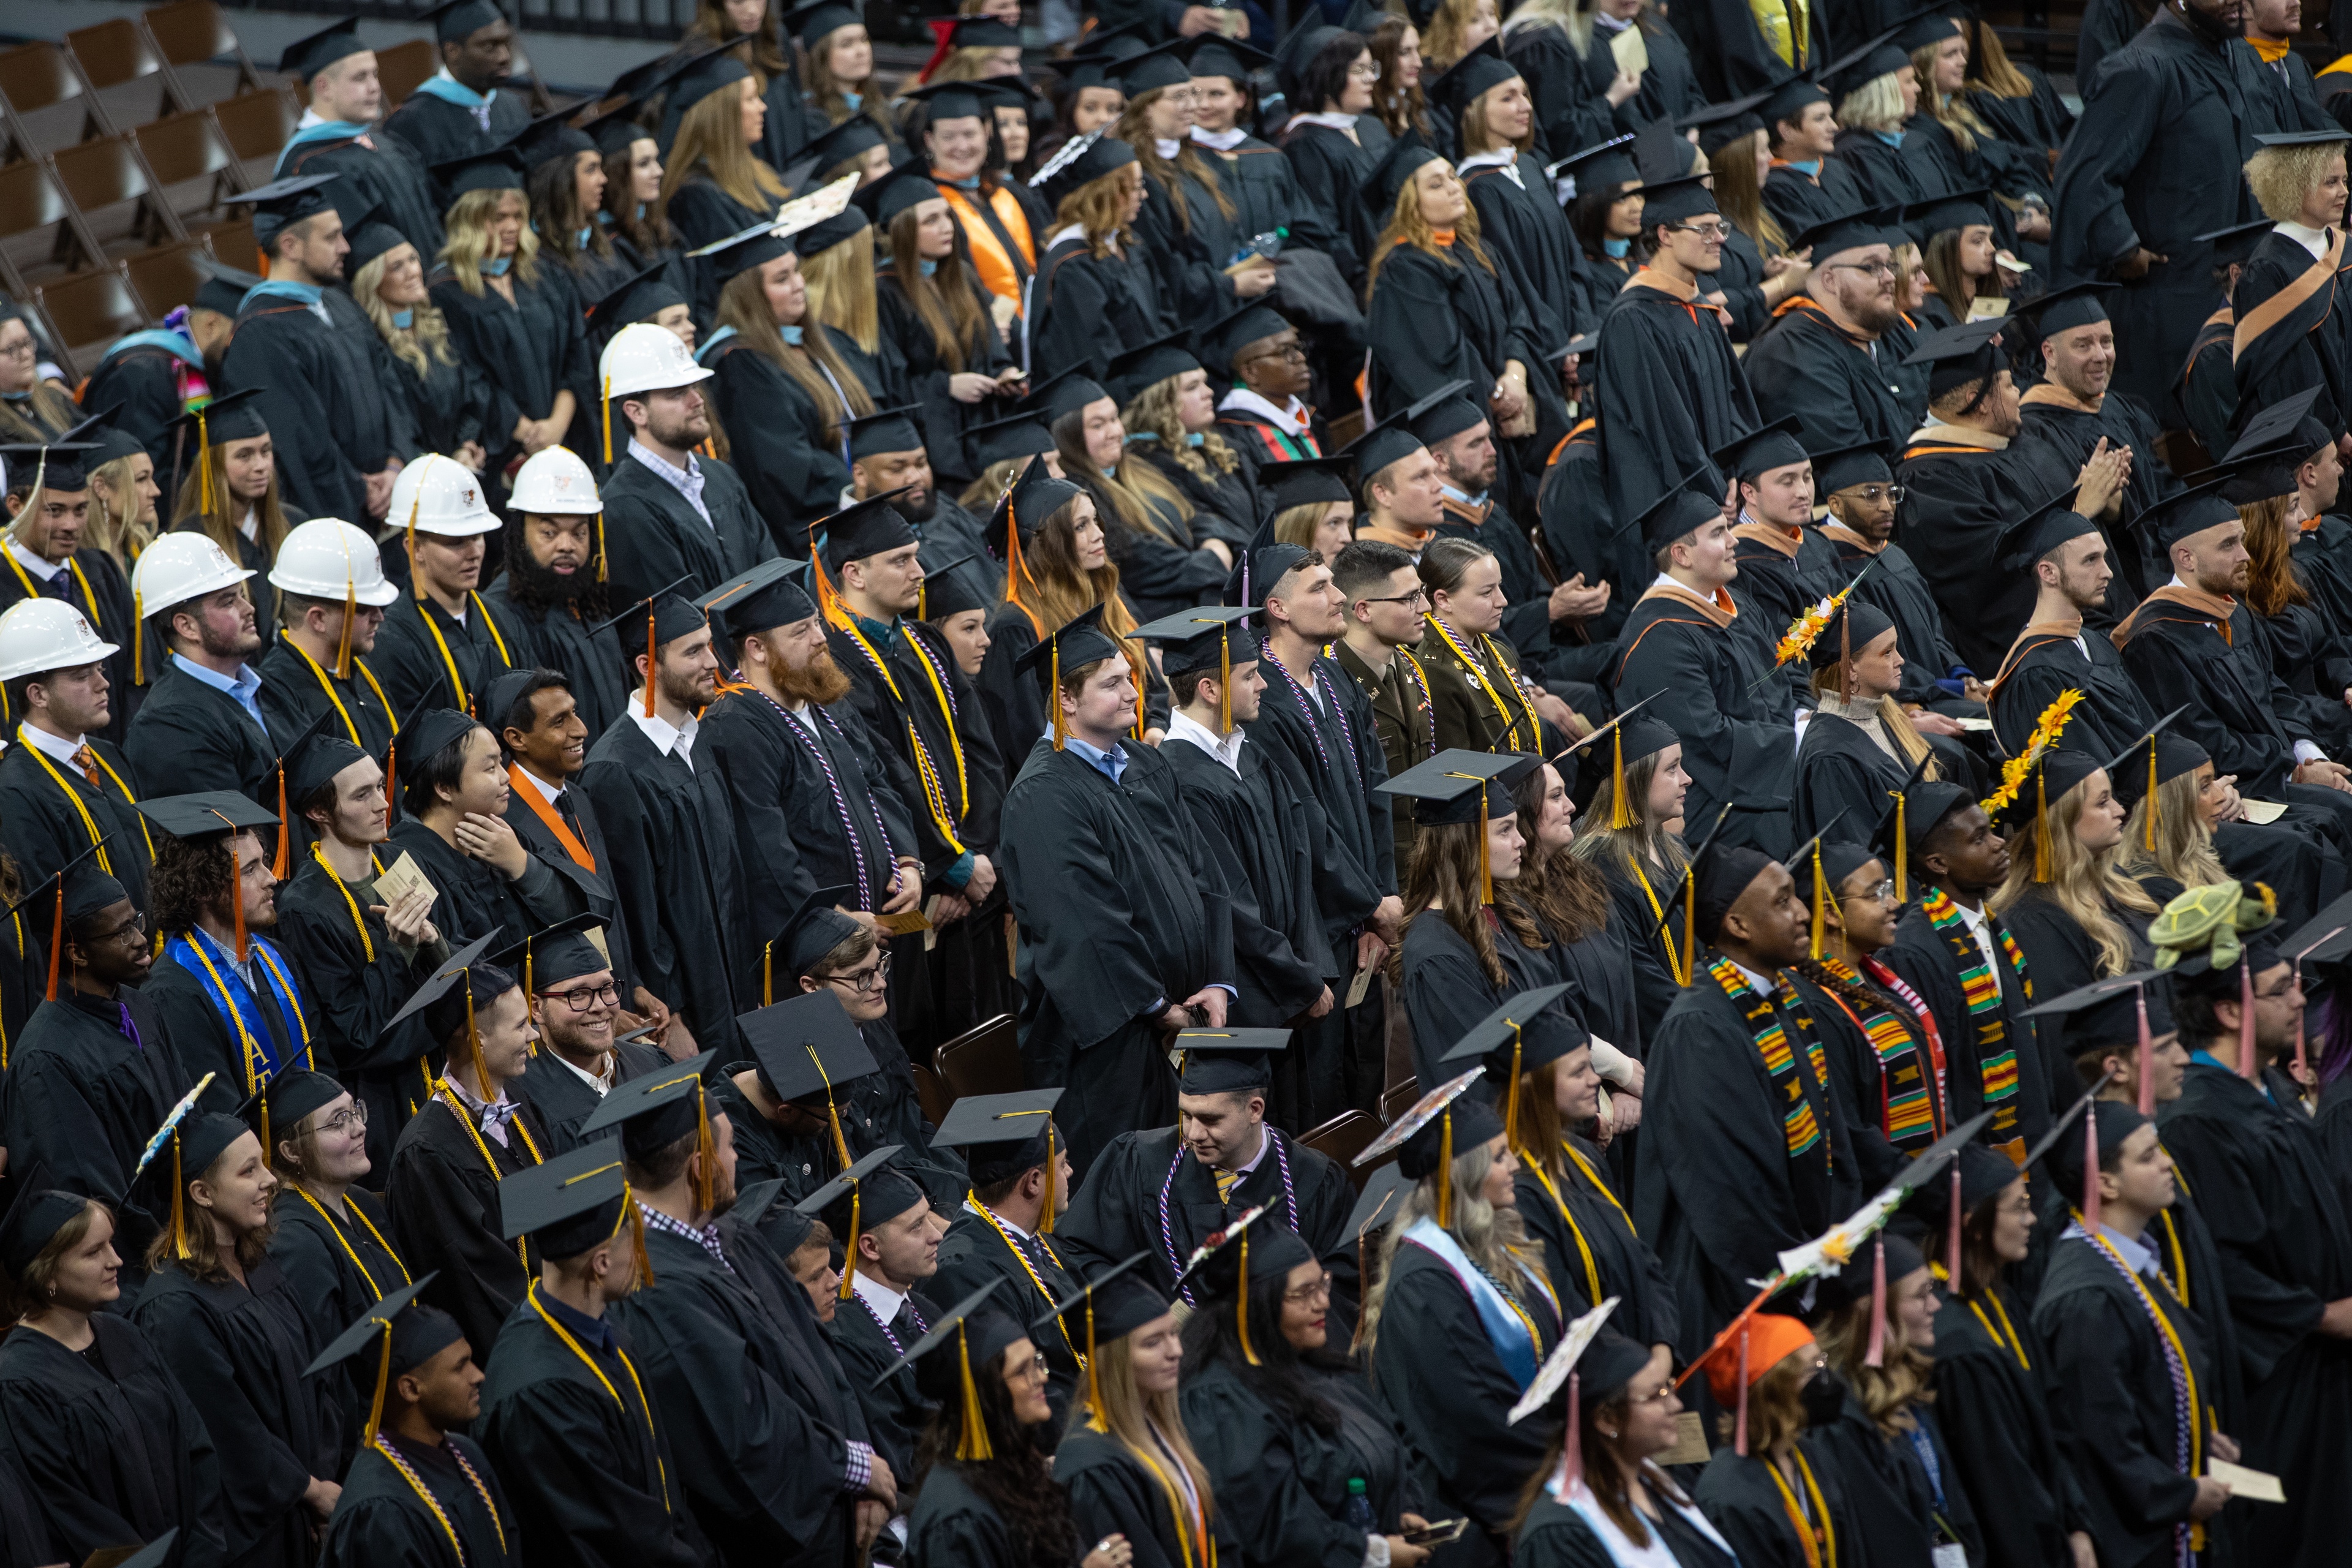 Graduates stand at the Stroh Center